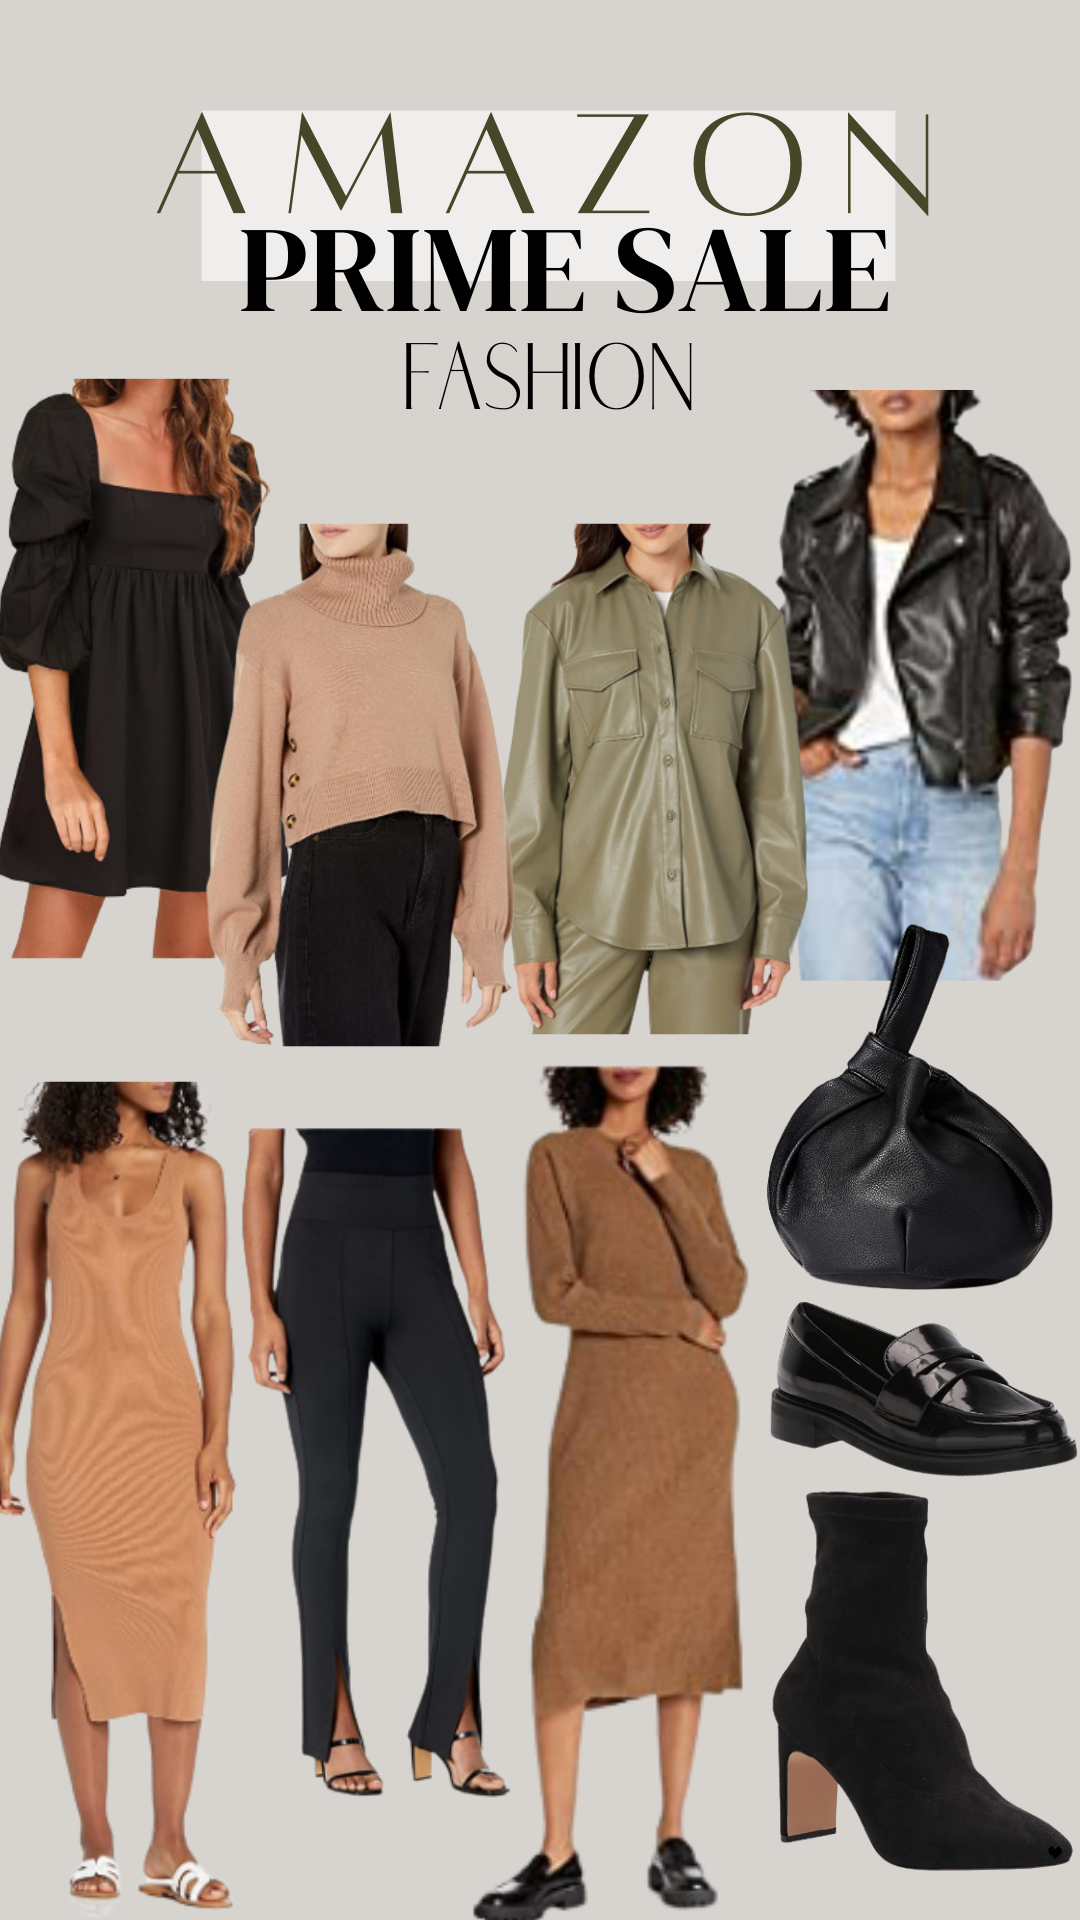 Amazon Prime Early Access Sale-Jaclyn De Leon style. Exclusive discounts for Amazon prime members. Categories include fashion, beauty, active wear, home, and electrons at black friday prices.